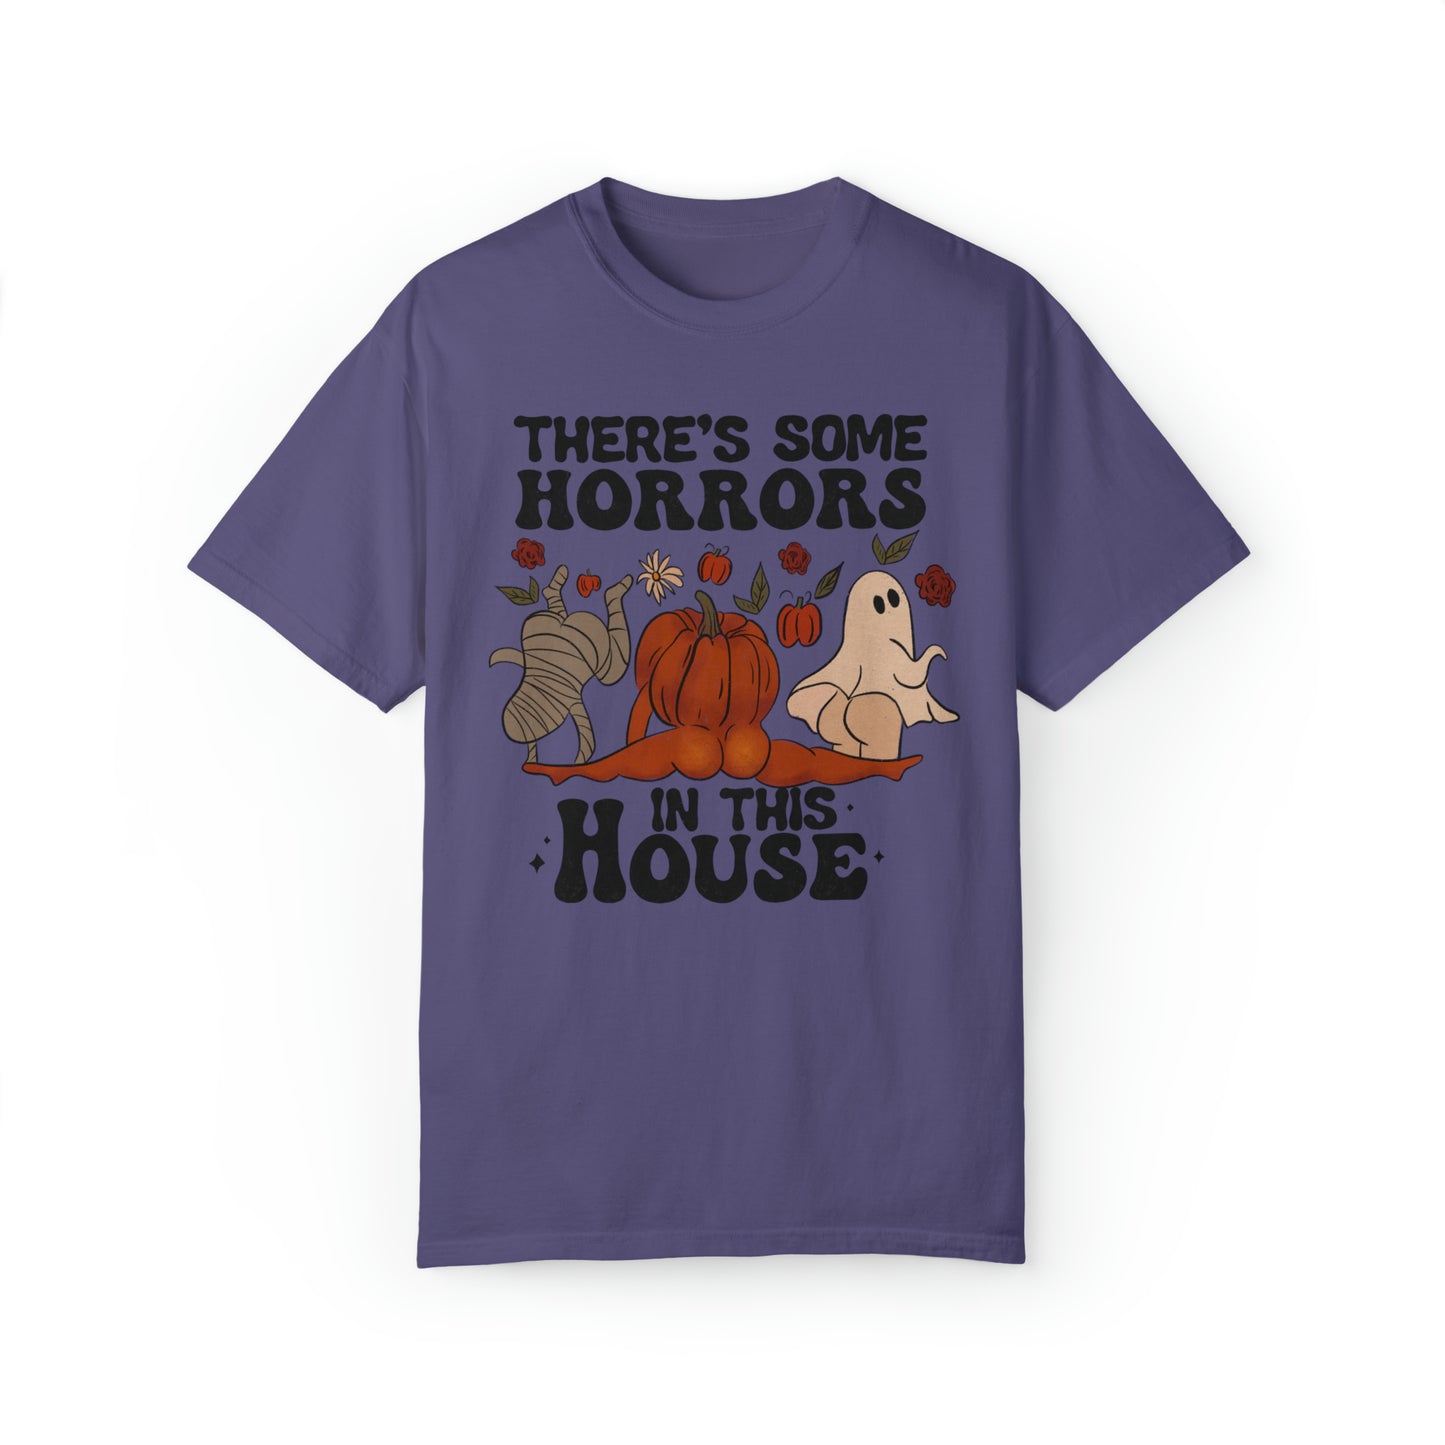 There's Some Horrors in this House, Comfort Colors Funny Halloween Ghost Shirt